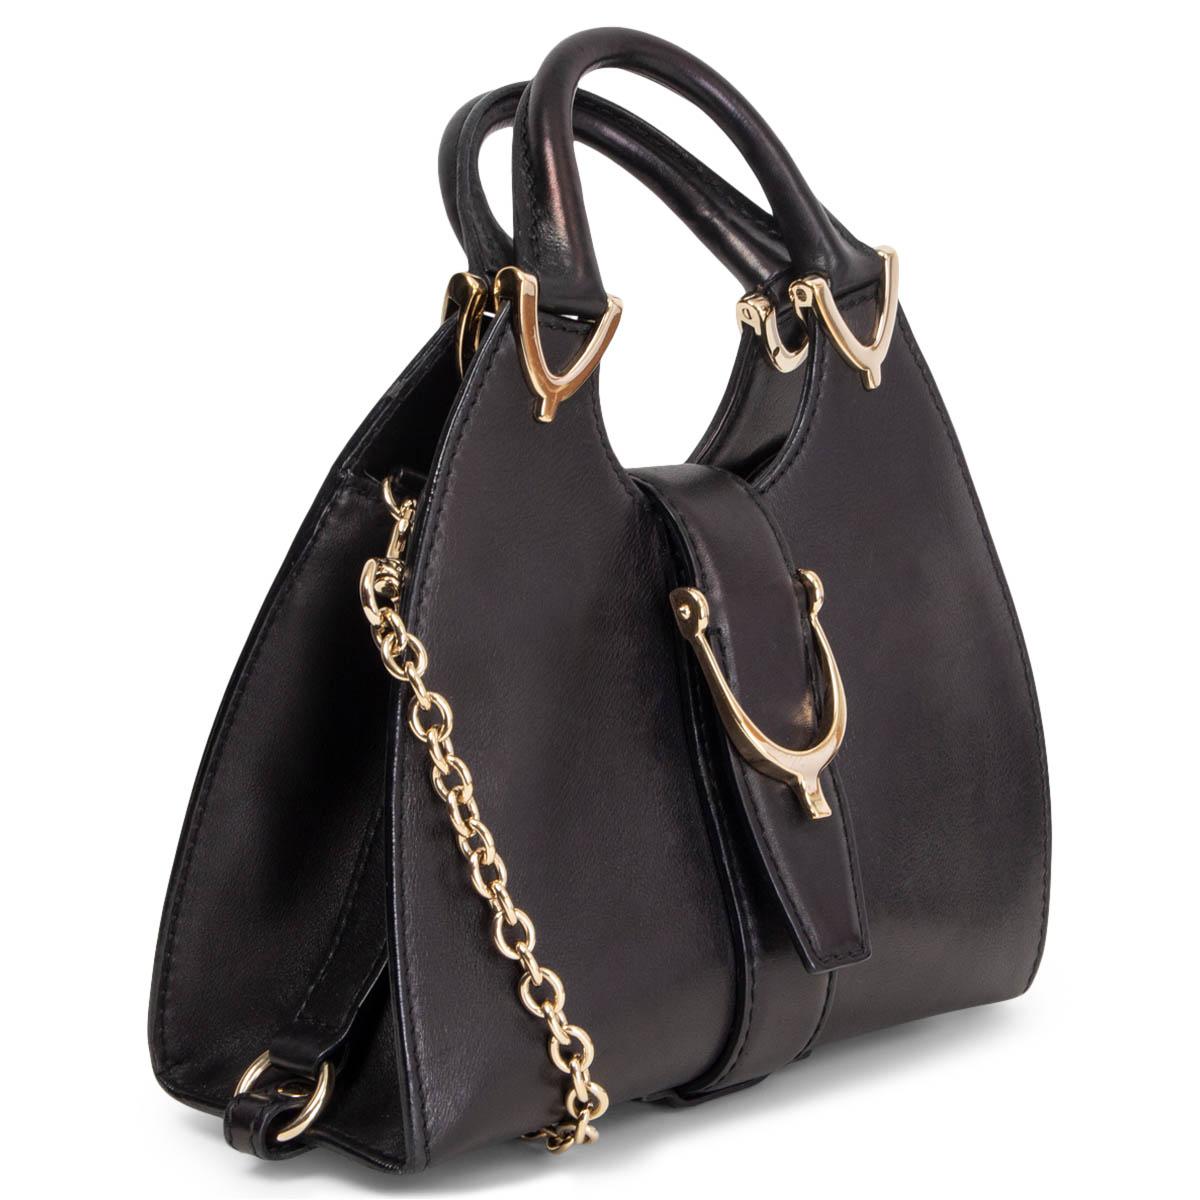 100% authentic Gucci Stirrup small top handle shoulder bag is crafted of black polished smooth calfskin leather. The bag features looping rolled leather top handles with light gold-tone brass stirrup style links and a cross over strap with a stirrup